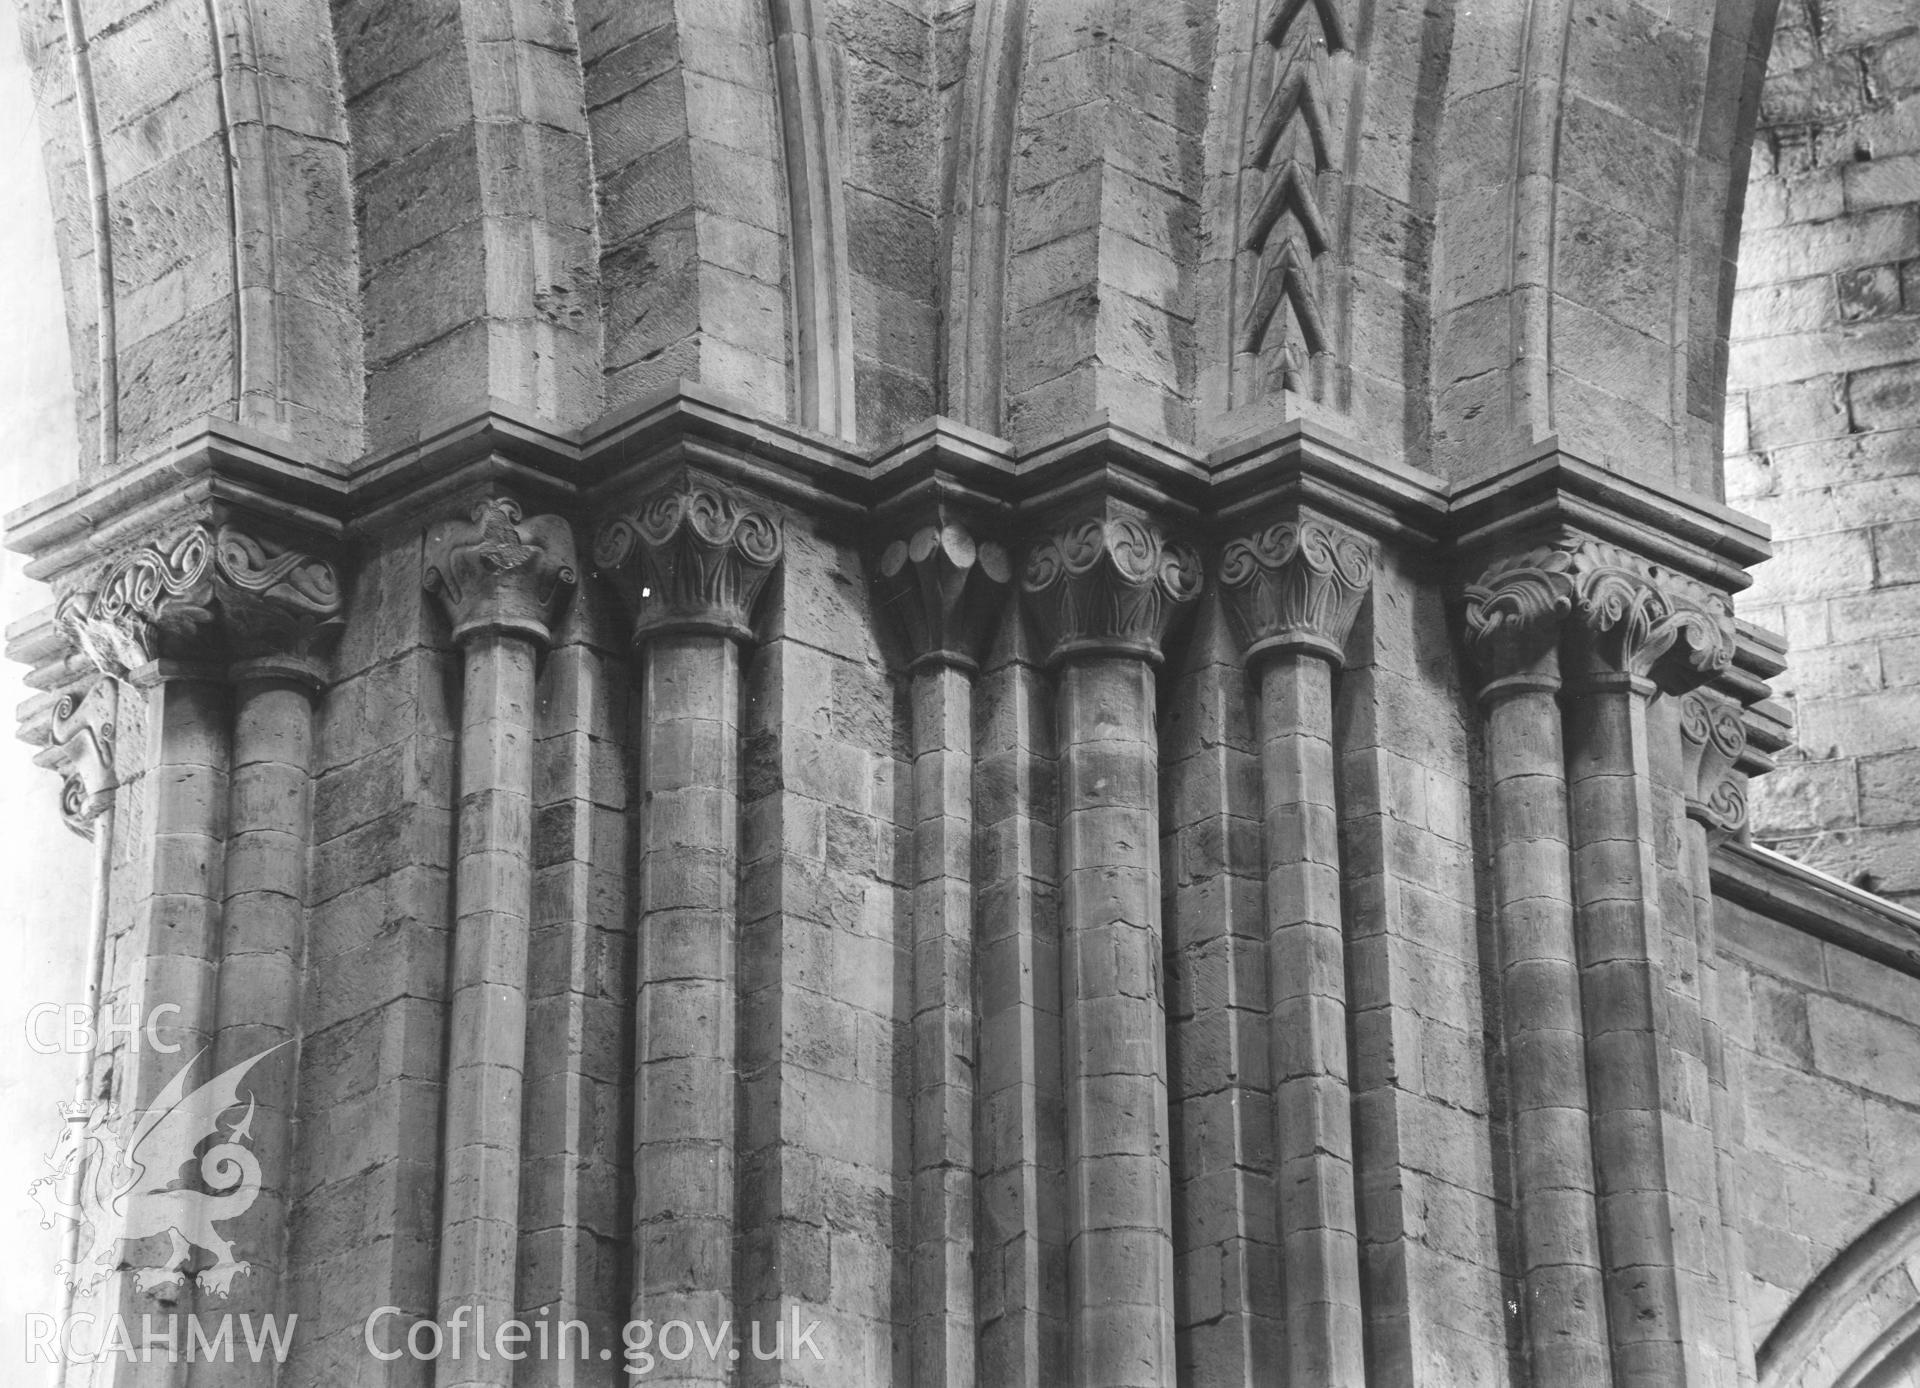 Digital copy of a black and white nitrate negative showing view of clustered columns at St. David's Cathedral, taken by E.W. Lovegrove, July 1936.